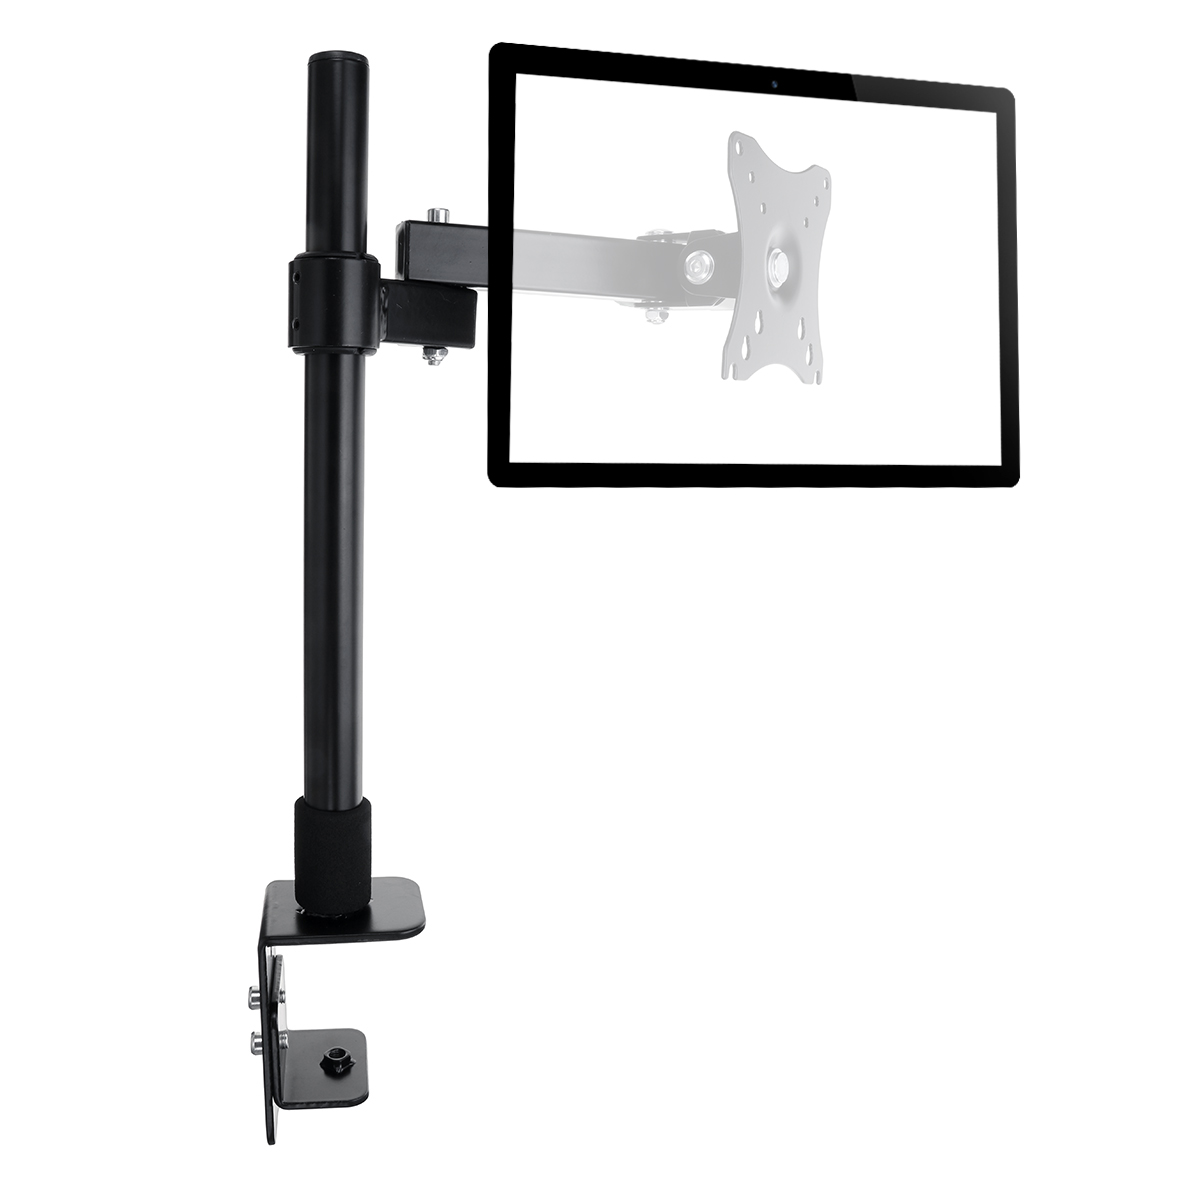 Single-Arm-Desk-Mount-LCD-Computer-Monitor-Bracket-Clamp-Stand-14-27-inch-Screen-TV-Bracket-1900409-6